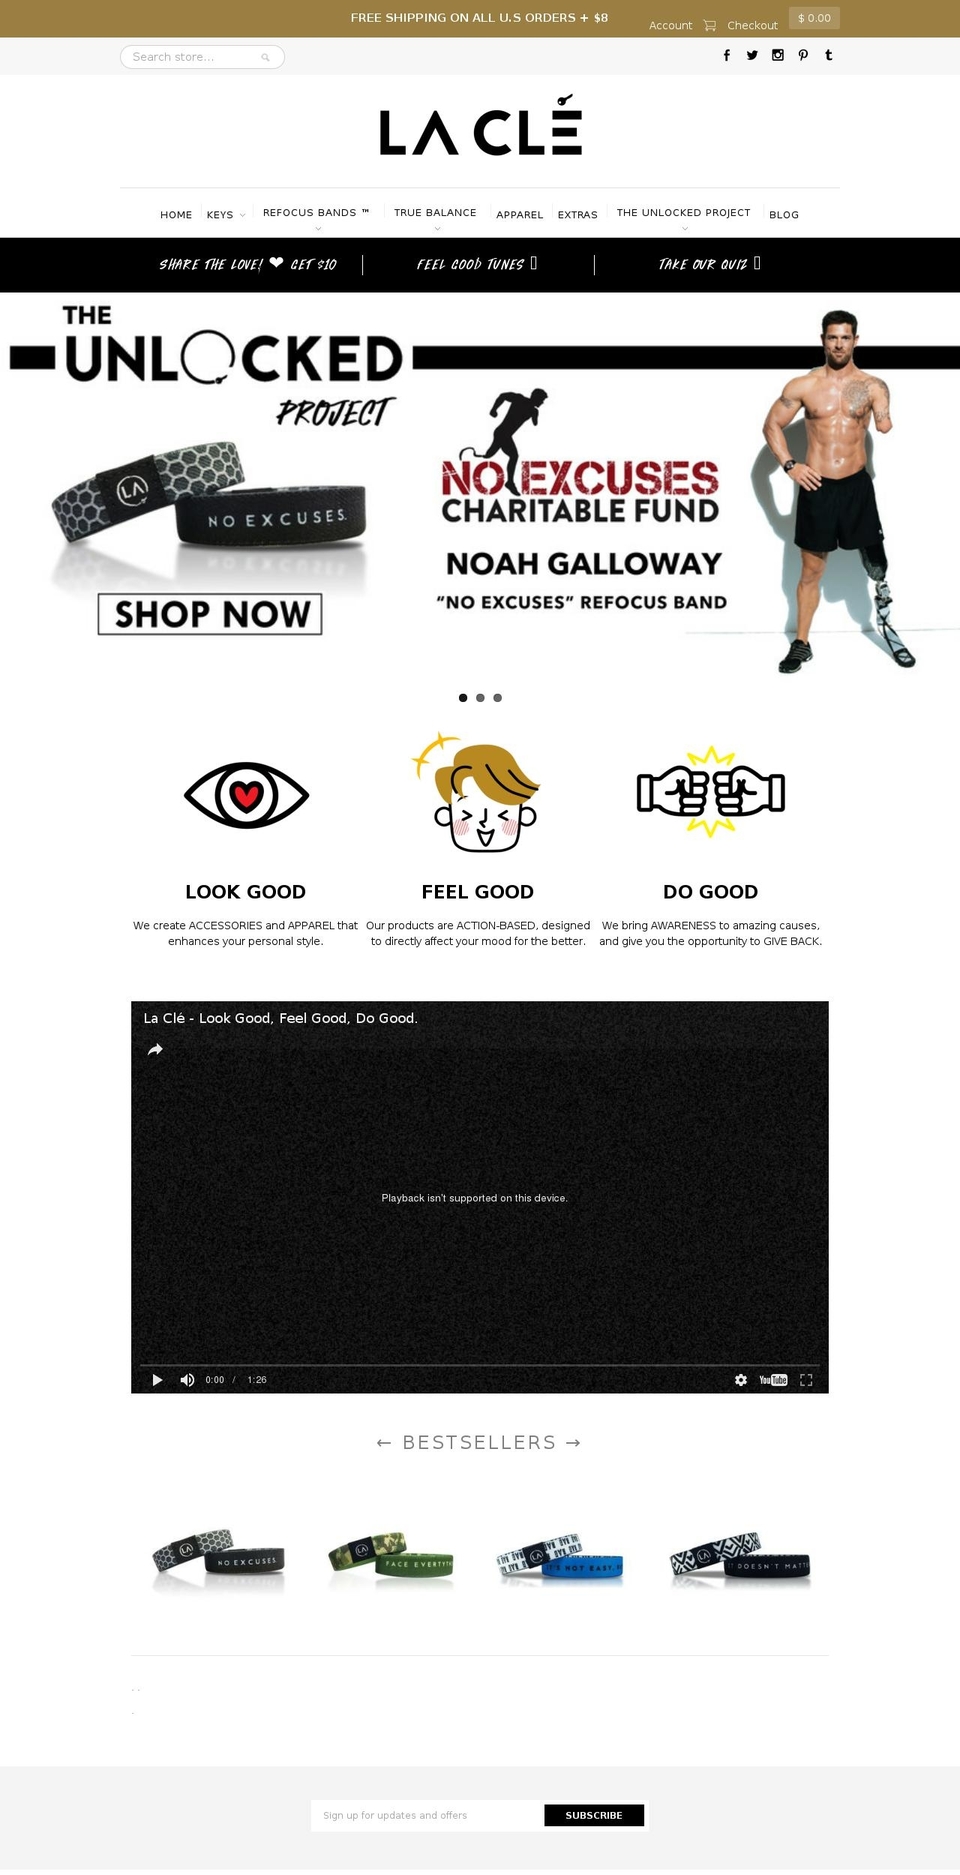 Wholesale Shopify theme site example laclejewelry.com